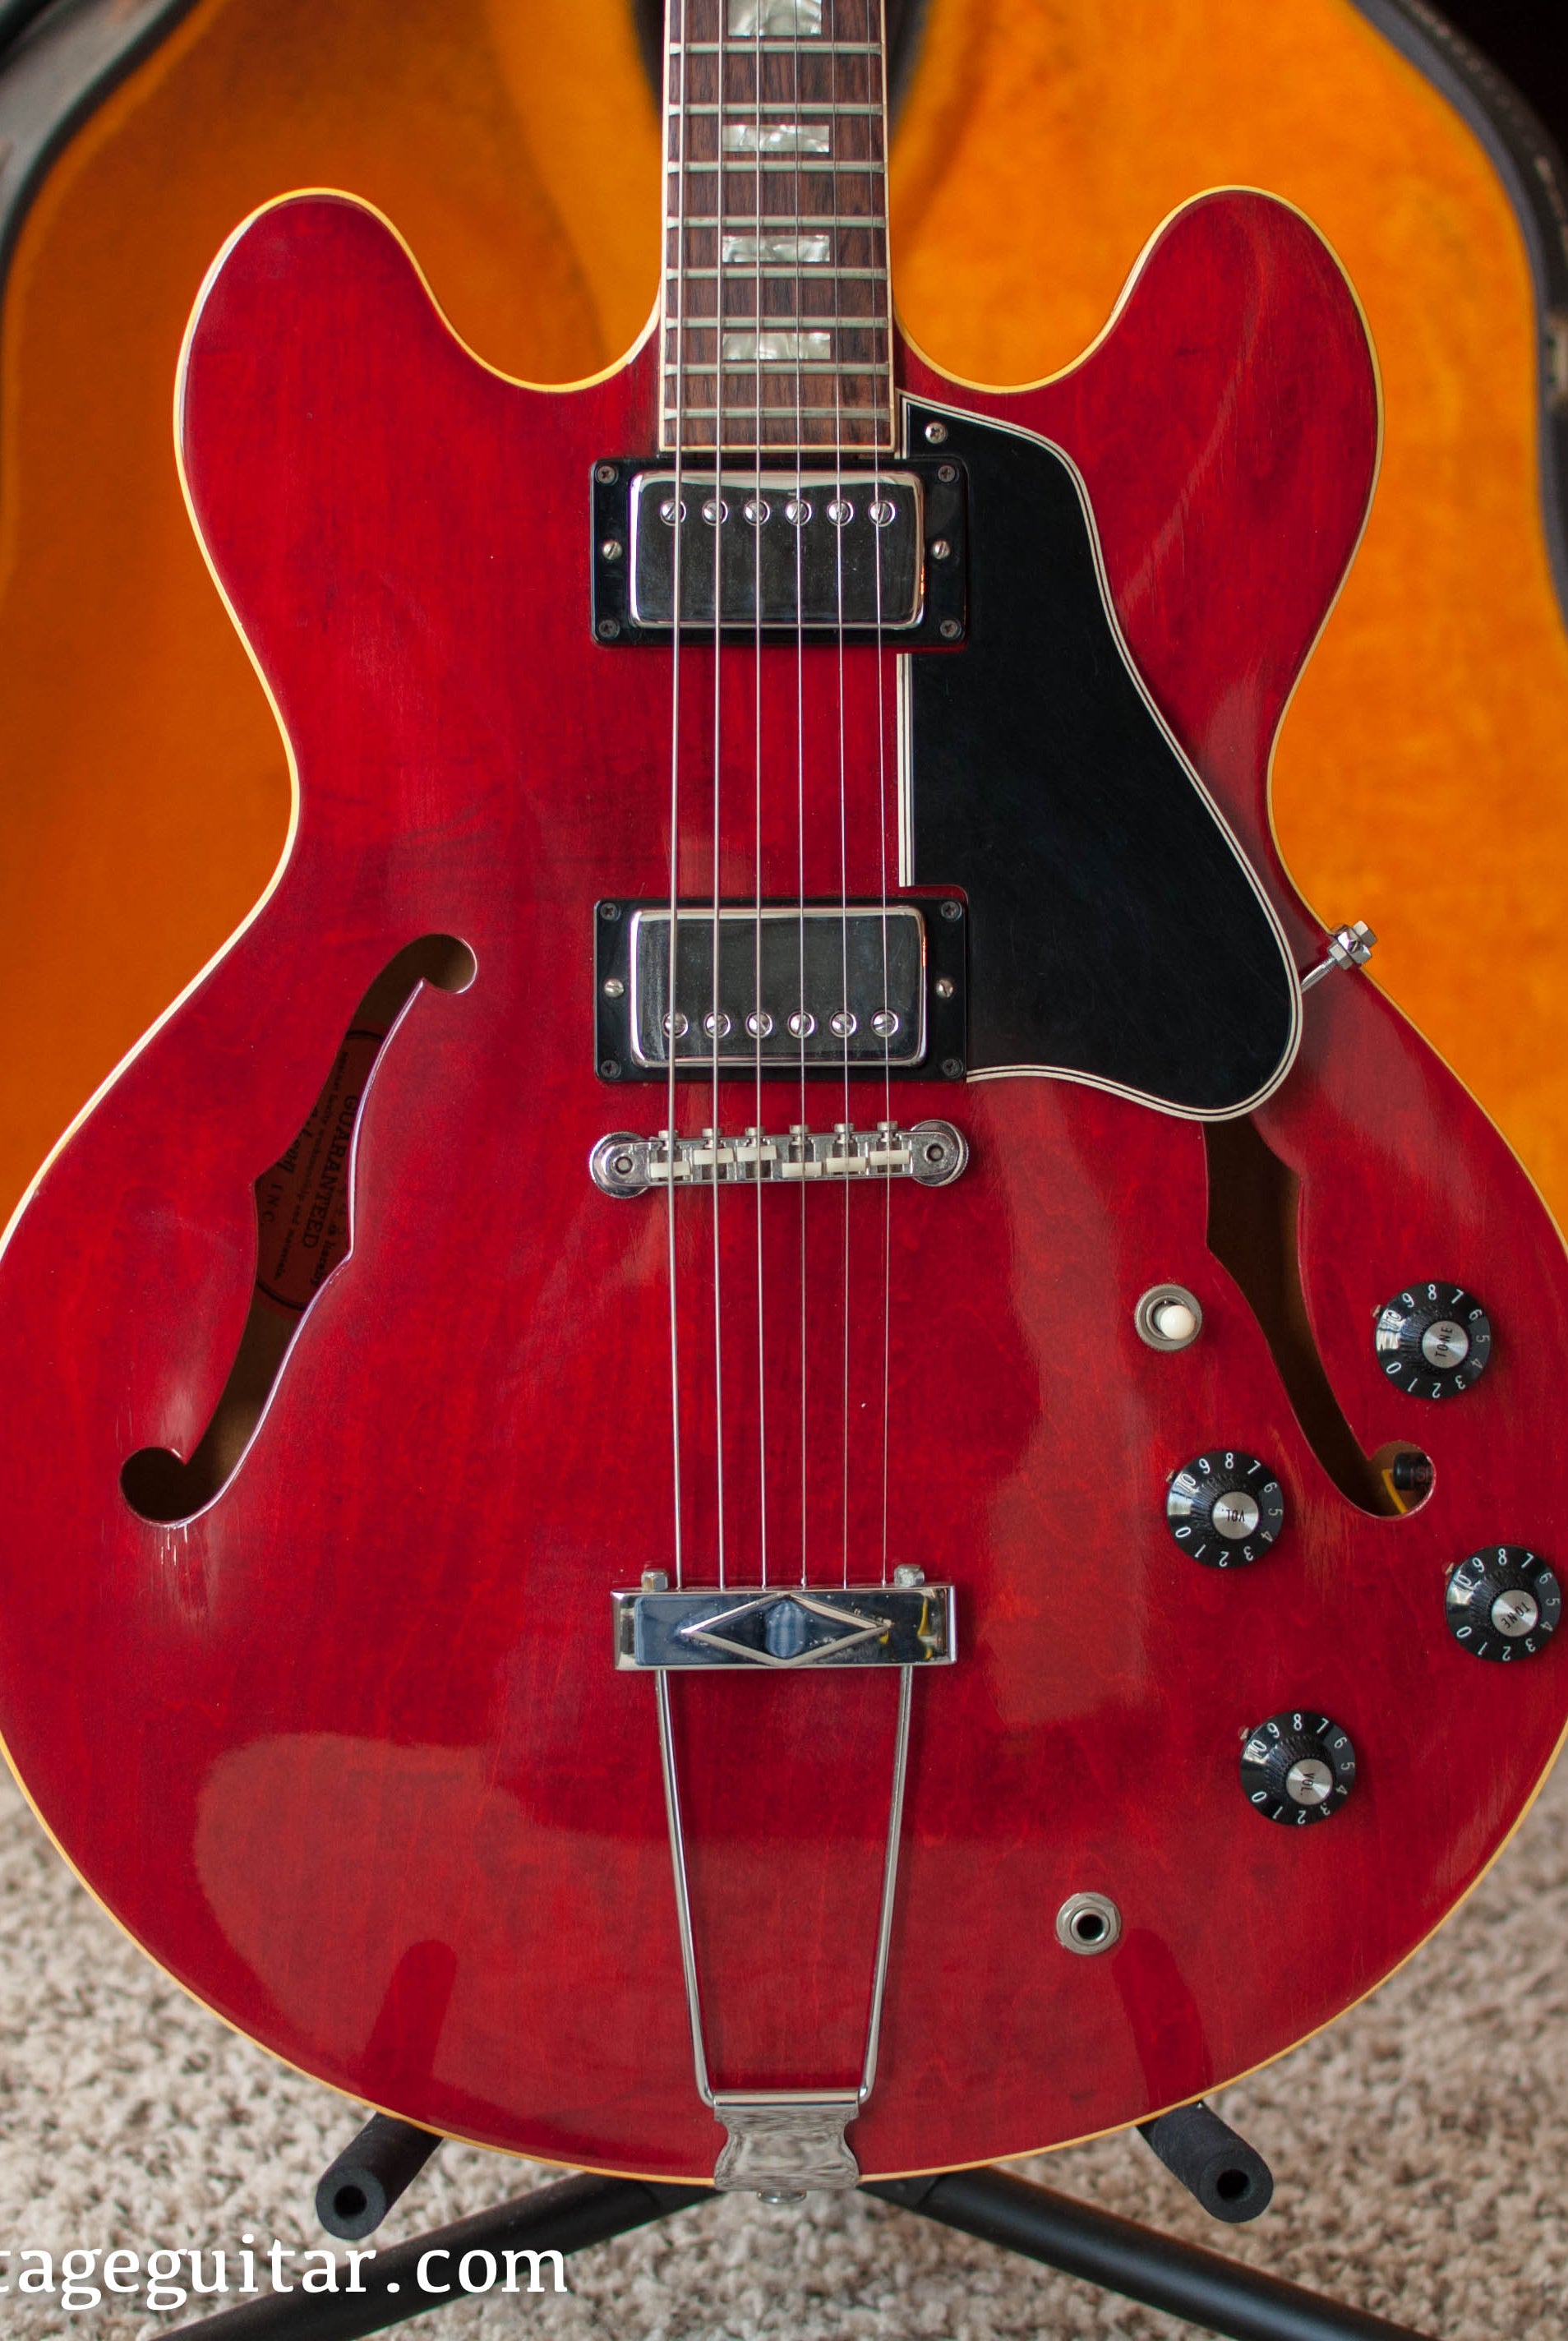 Vintage 1967 Gibson ES-335 Cherry red electric guitar